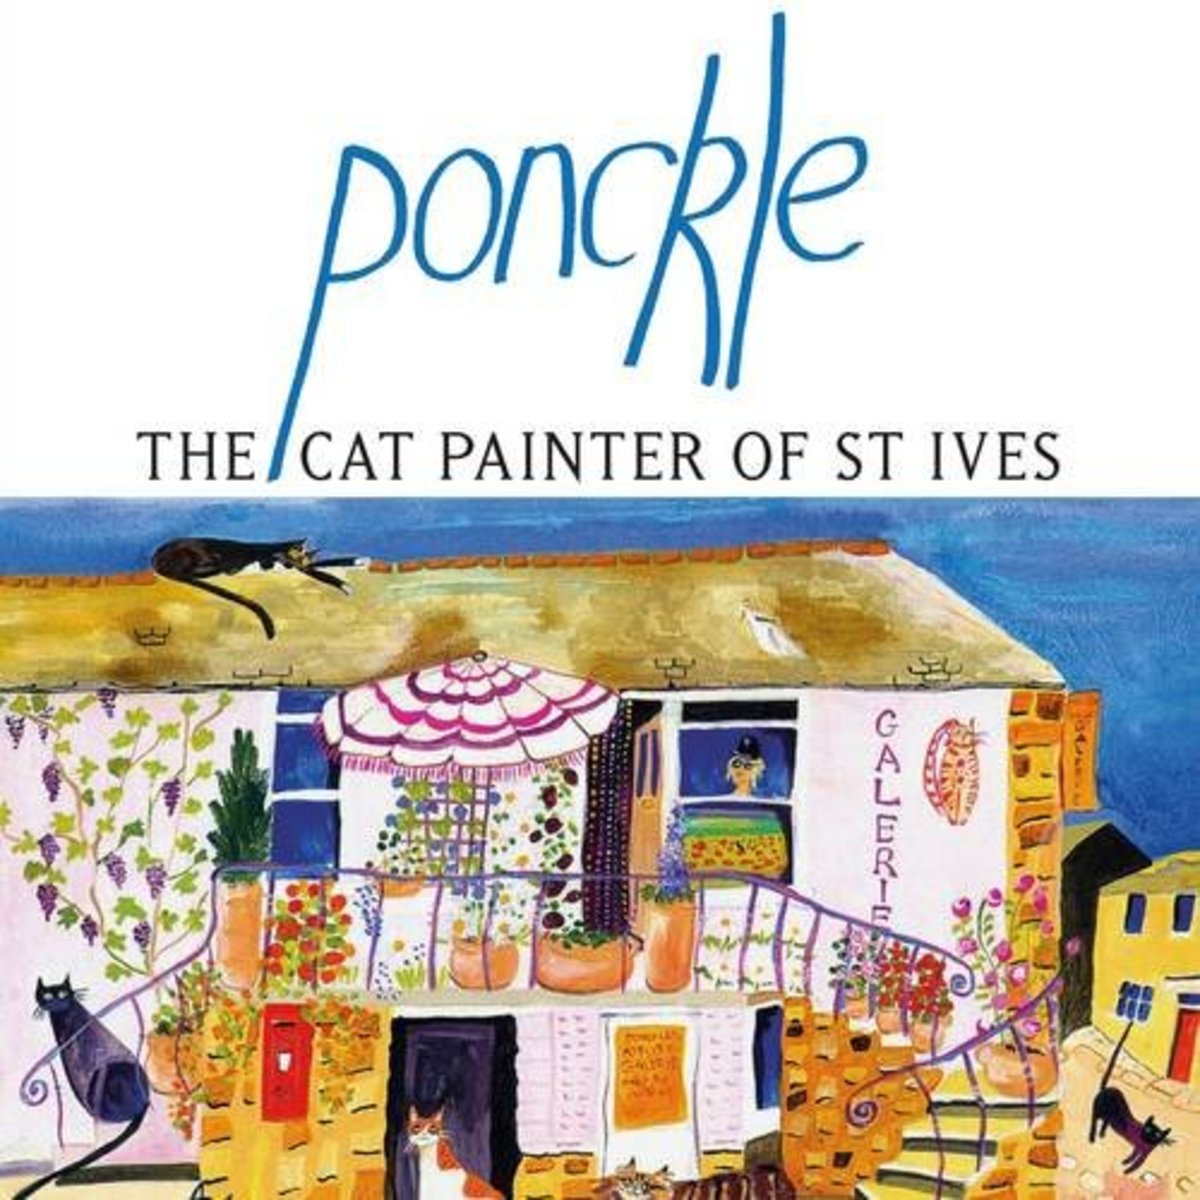 Ponckle Art For Sale: Ponckle the Cat Painter of St Ives Book, 2013.